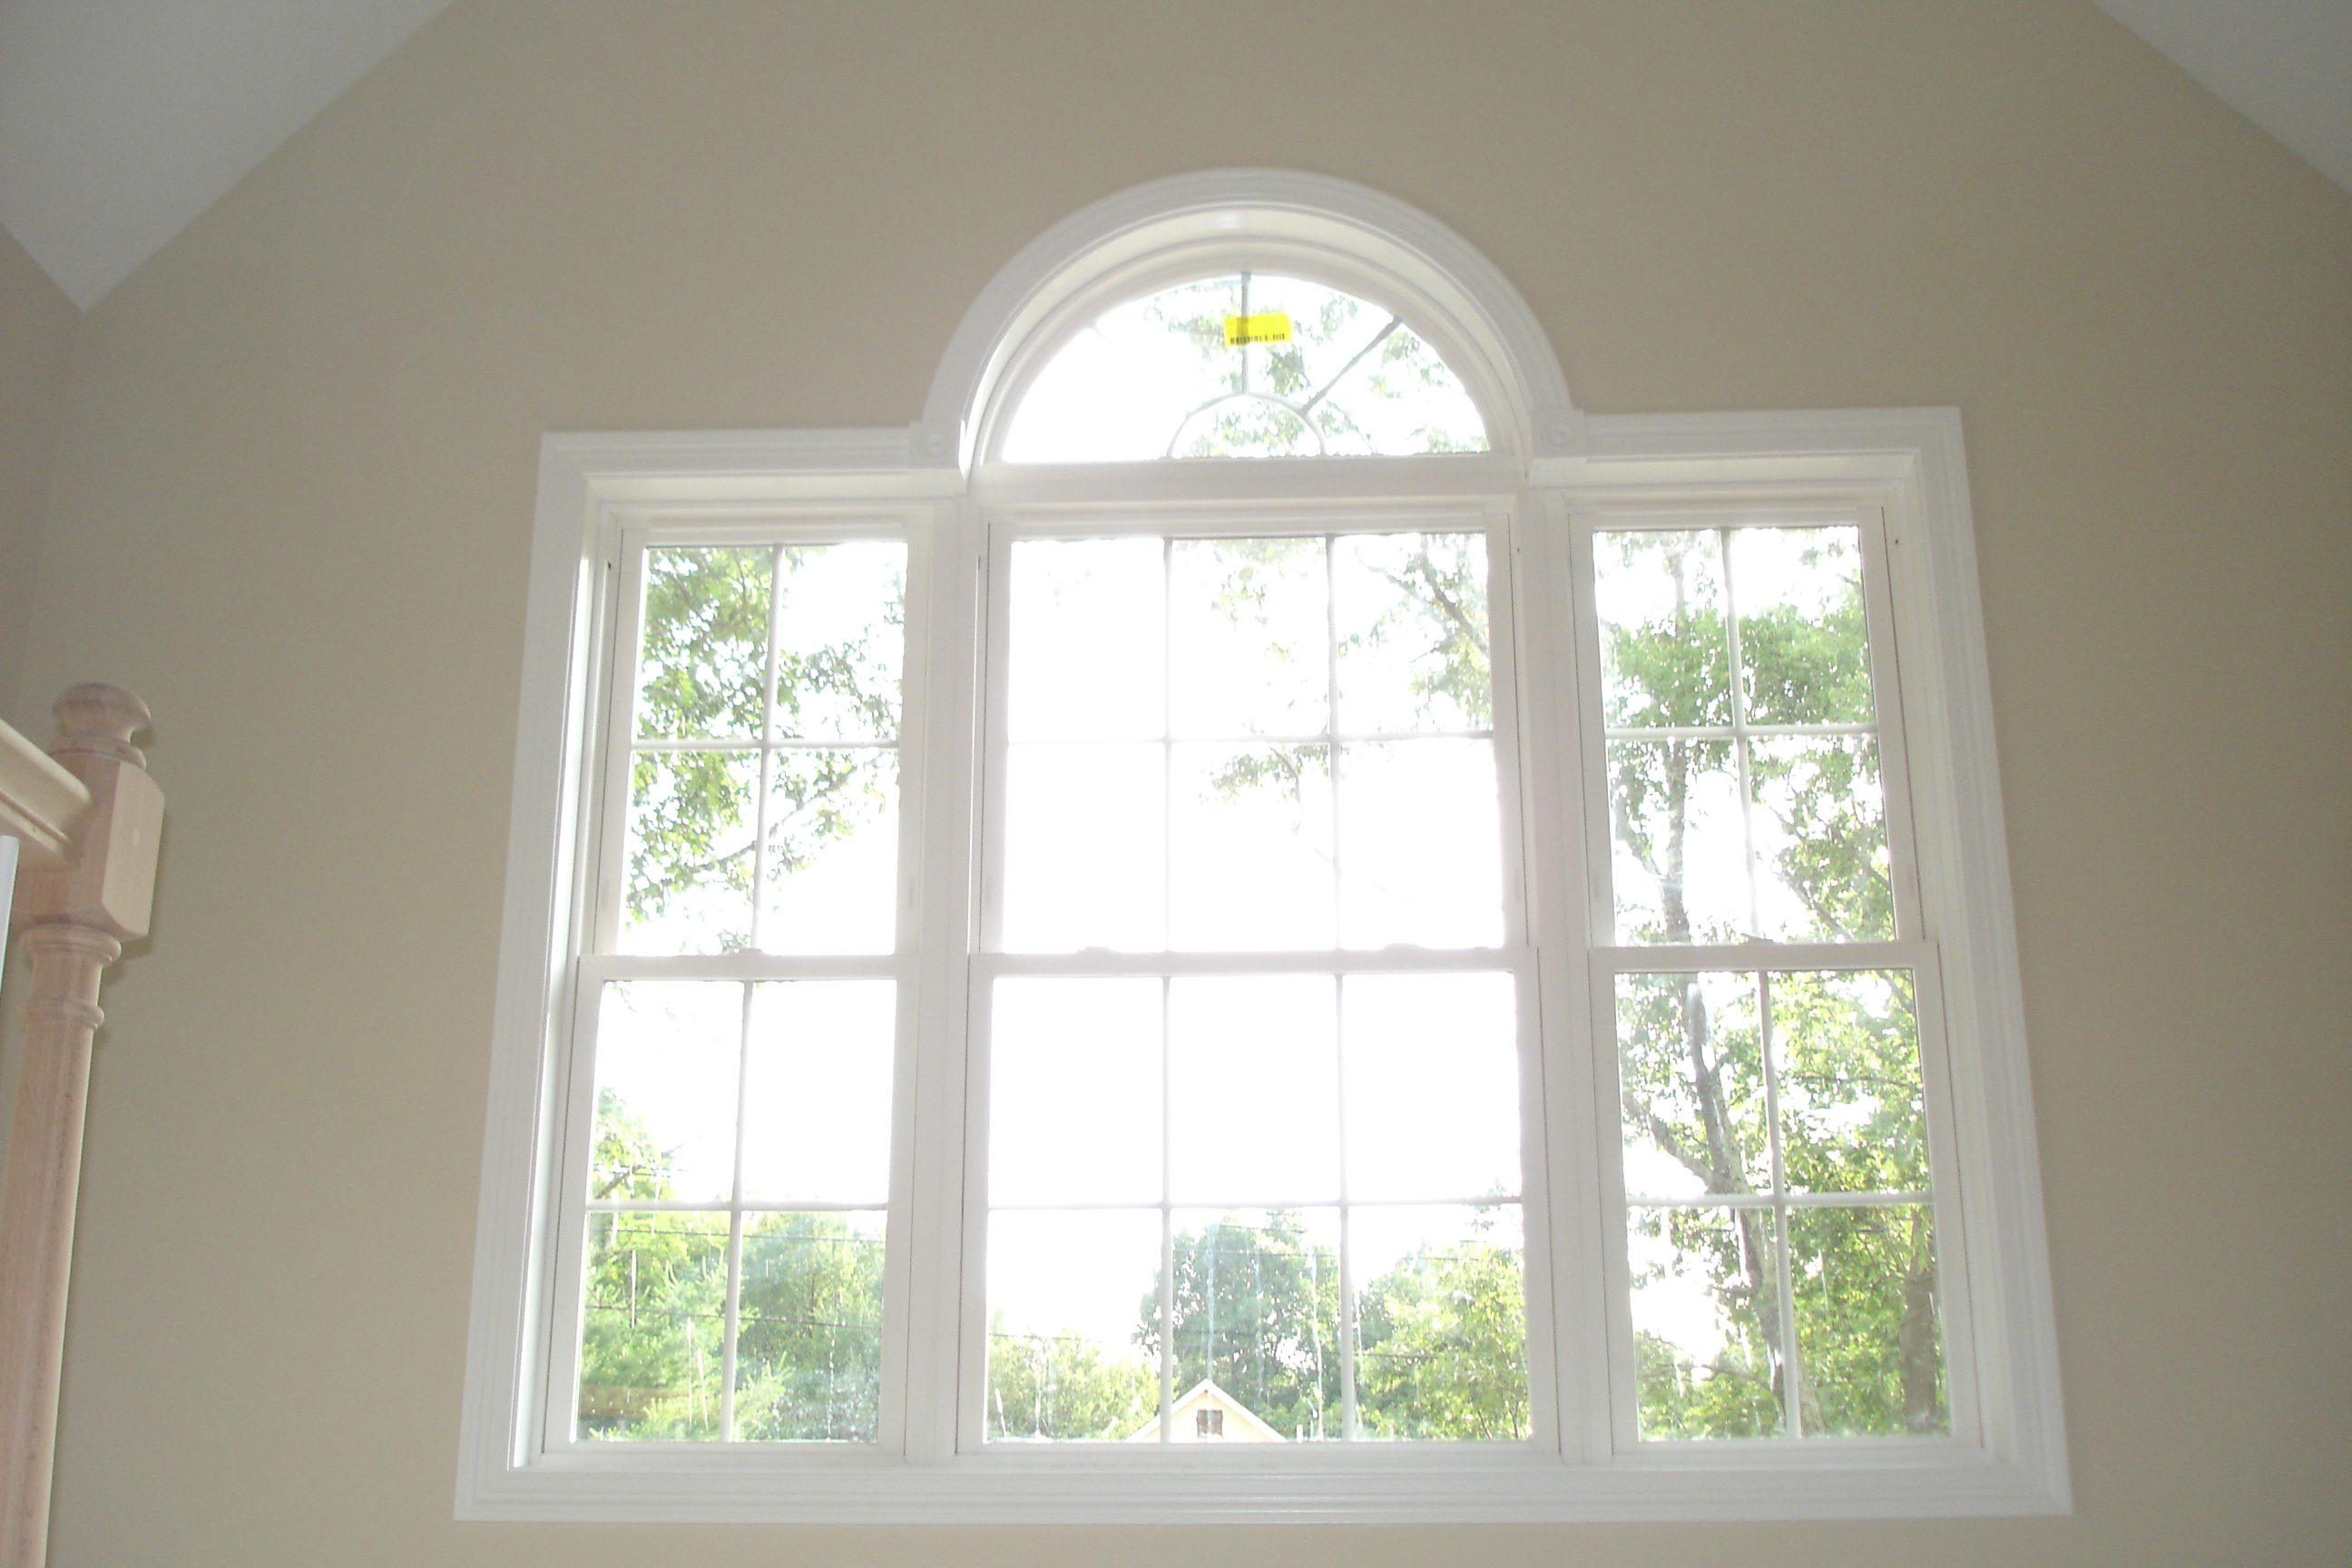 How to Paint a Window - picture of Window